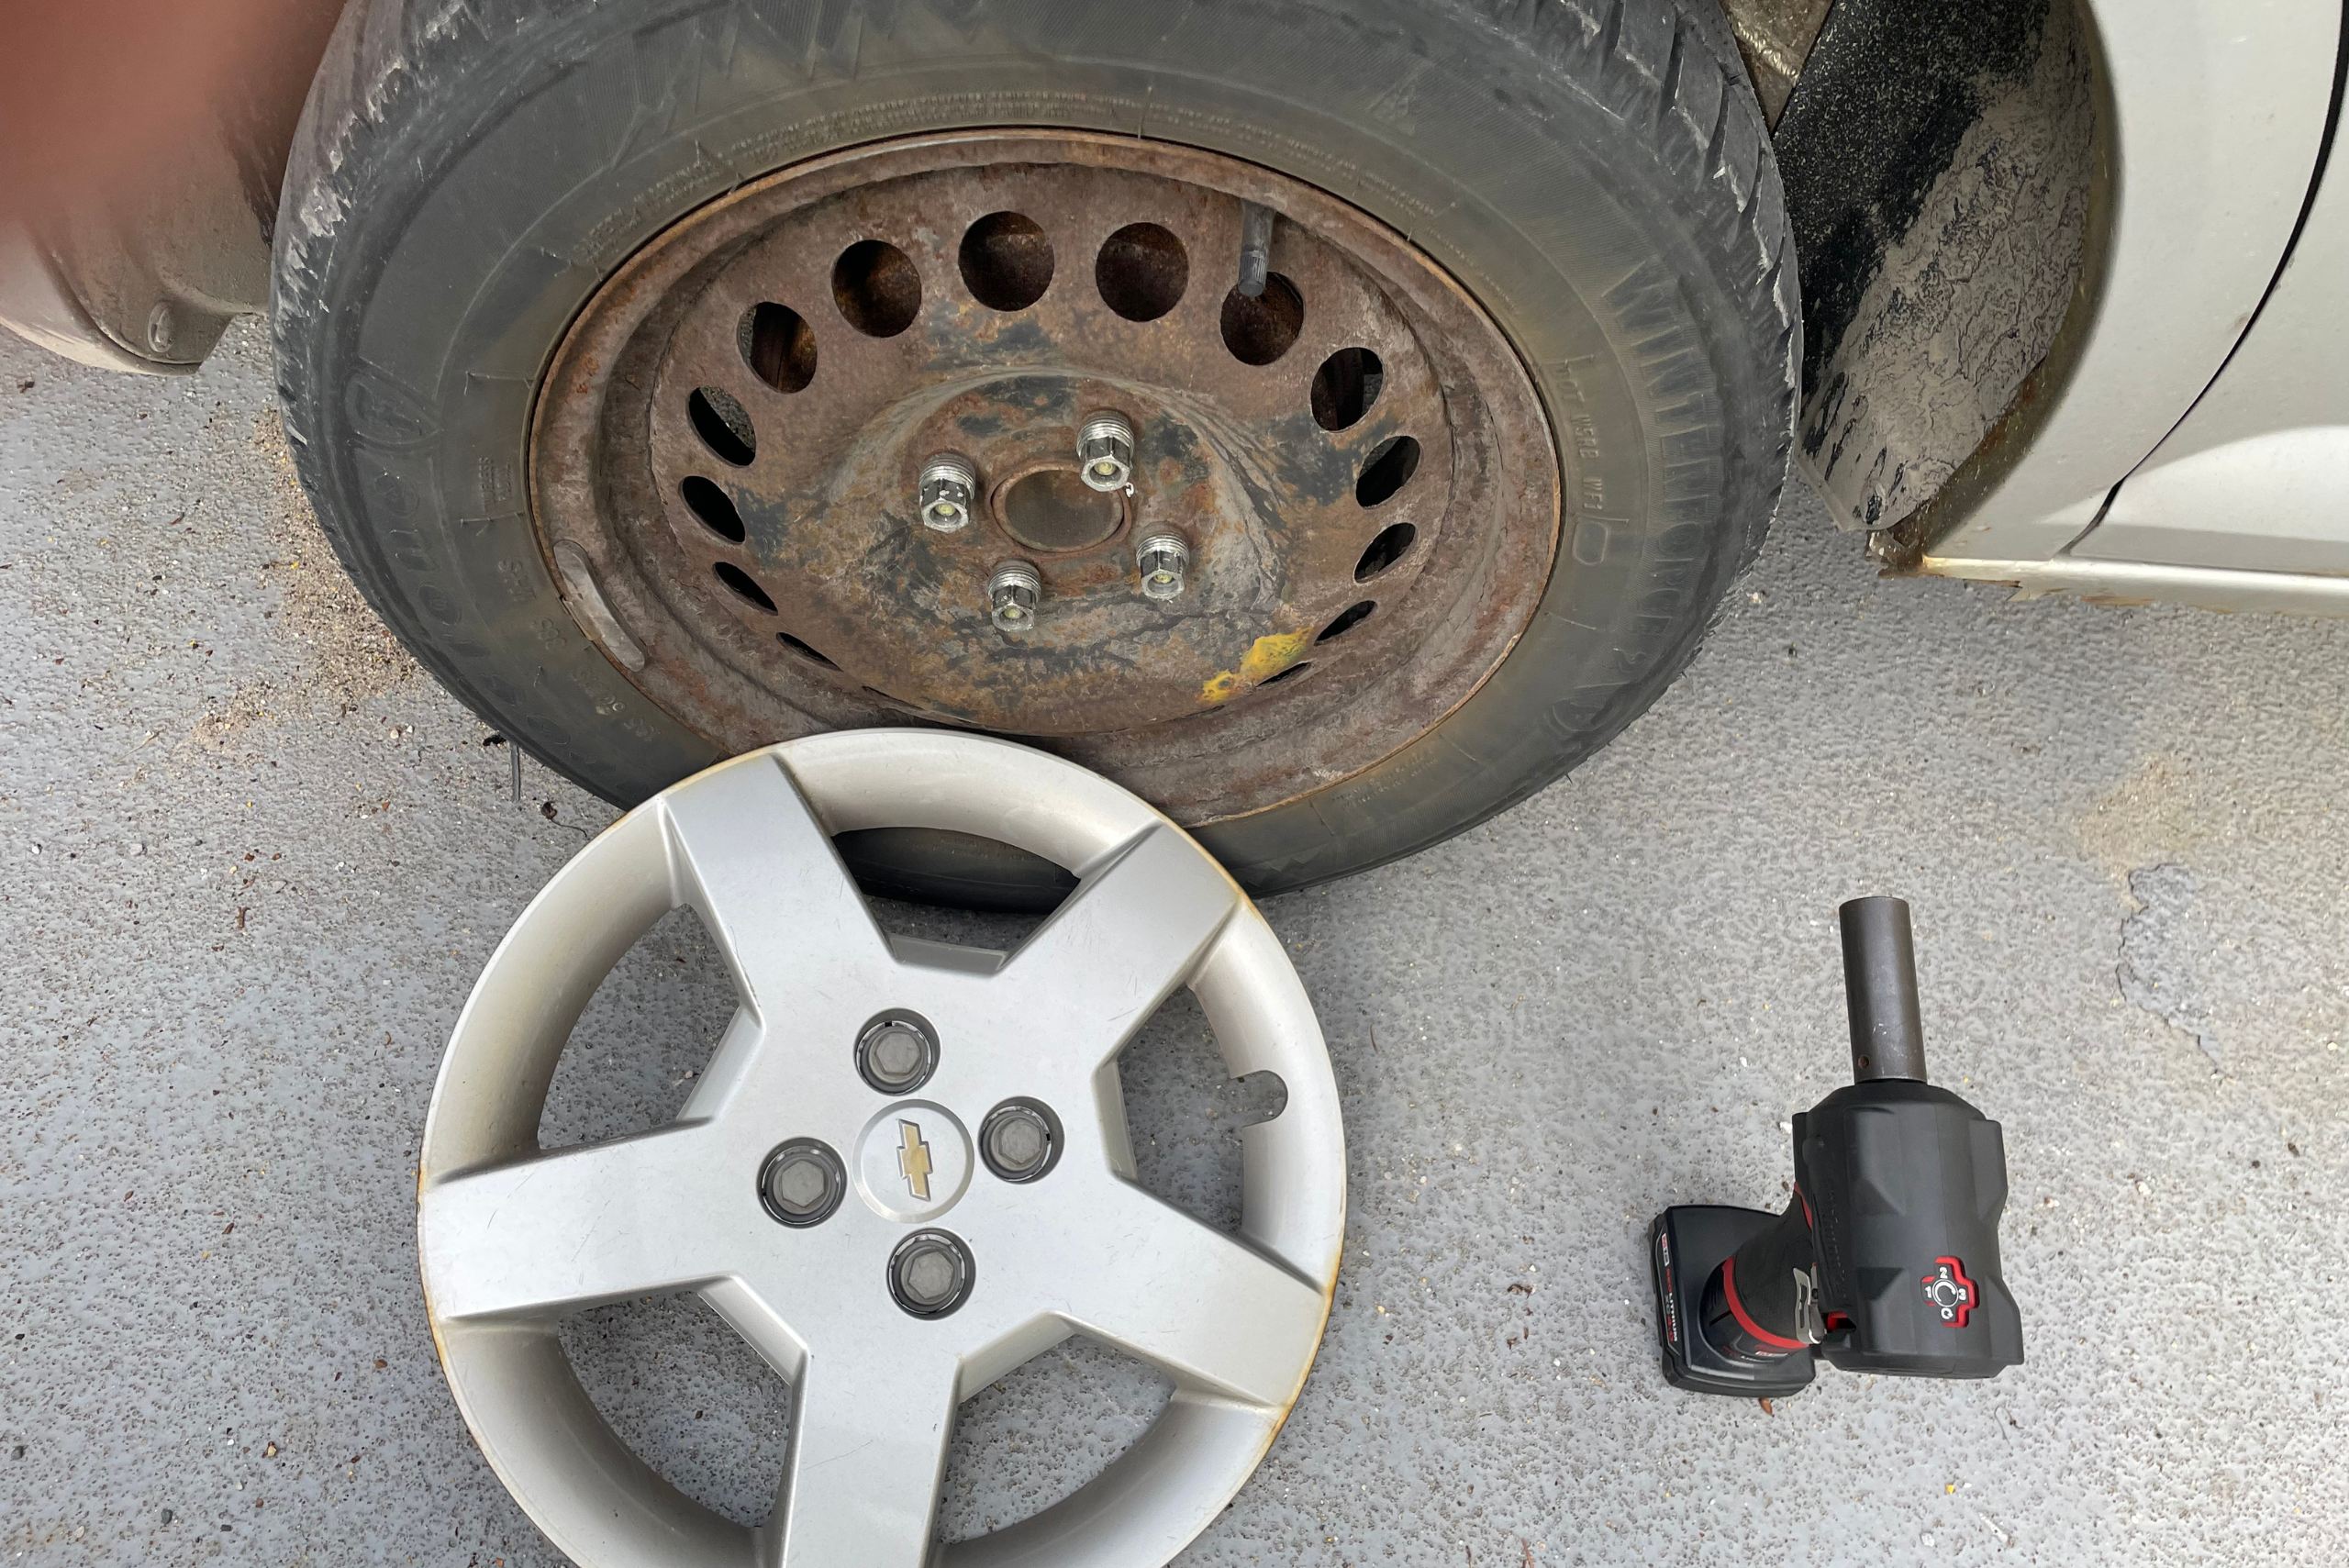 A wheel hub cap removed flanked by wheel.